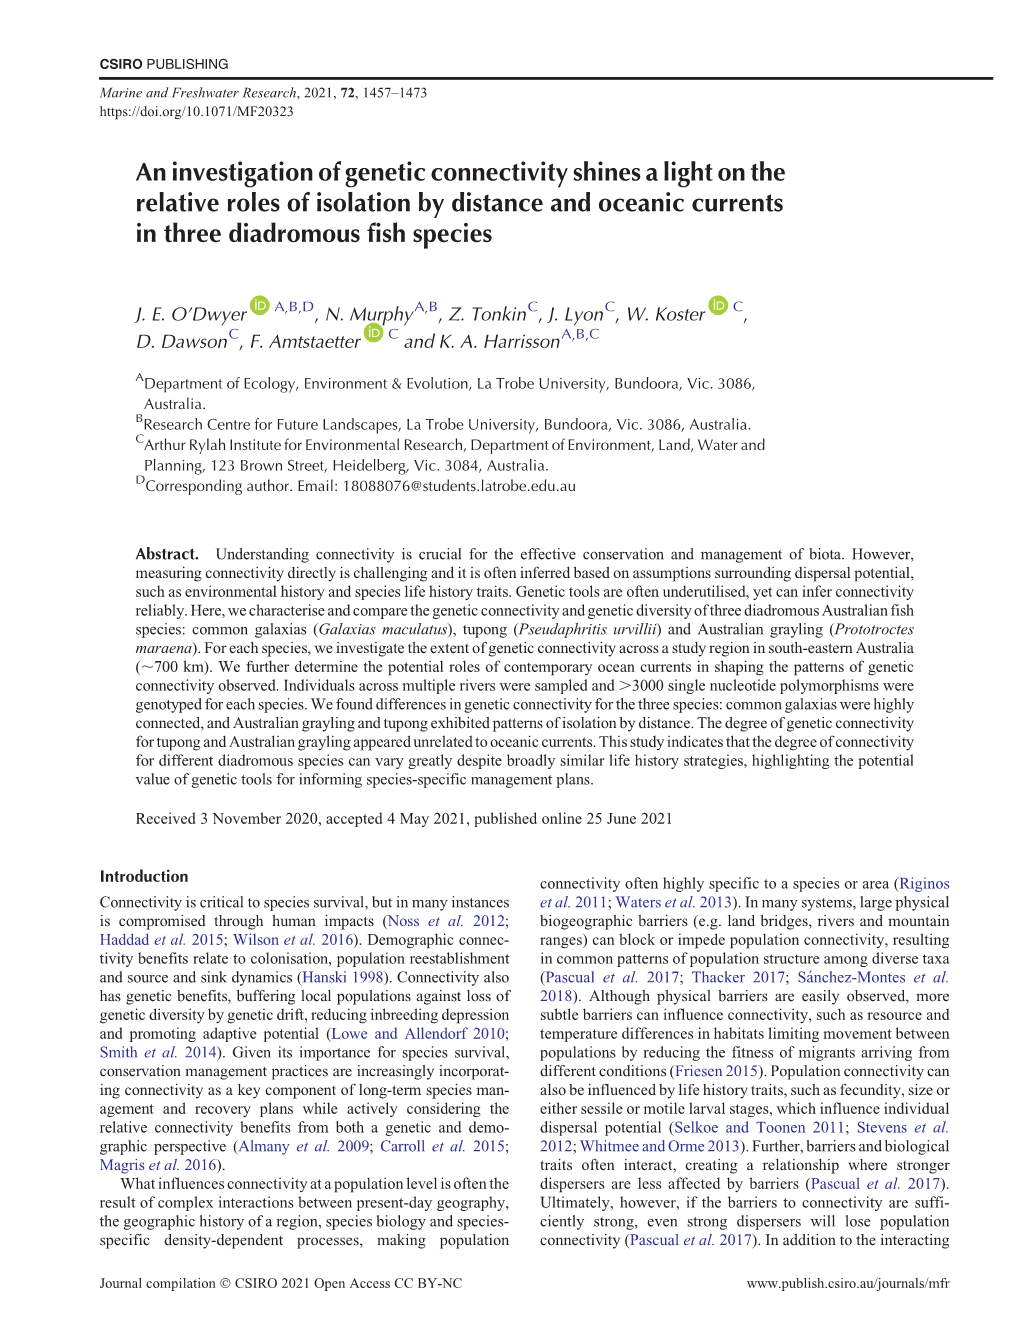 An Investigation of Genetic Connectivity Shines a Light on the Relative Roles of Isolation by Distance and Oceanic Currents in Three Diadromous Fish Species